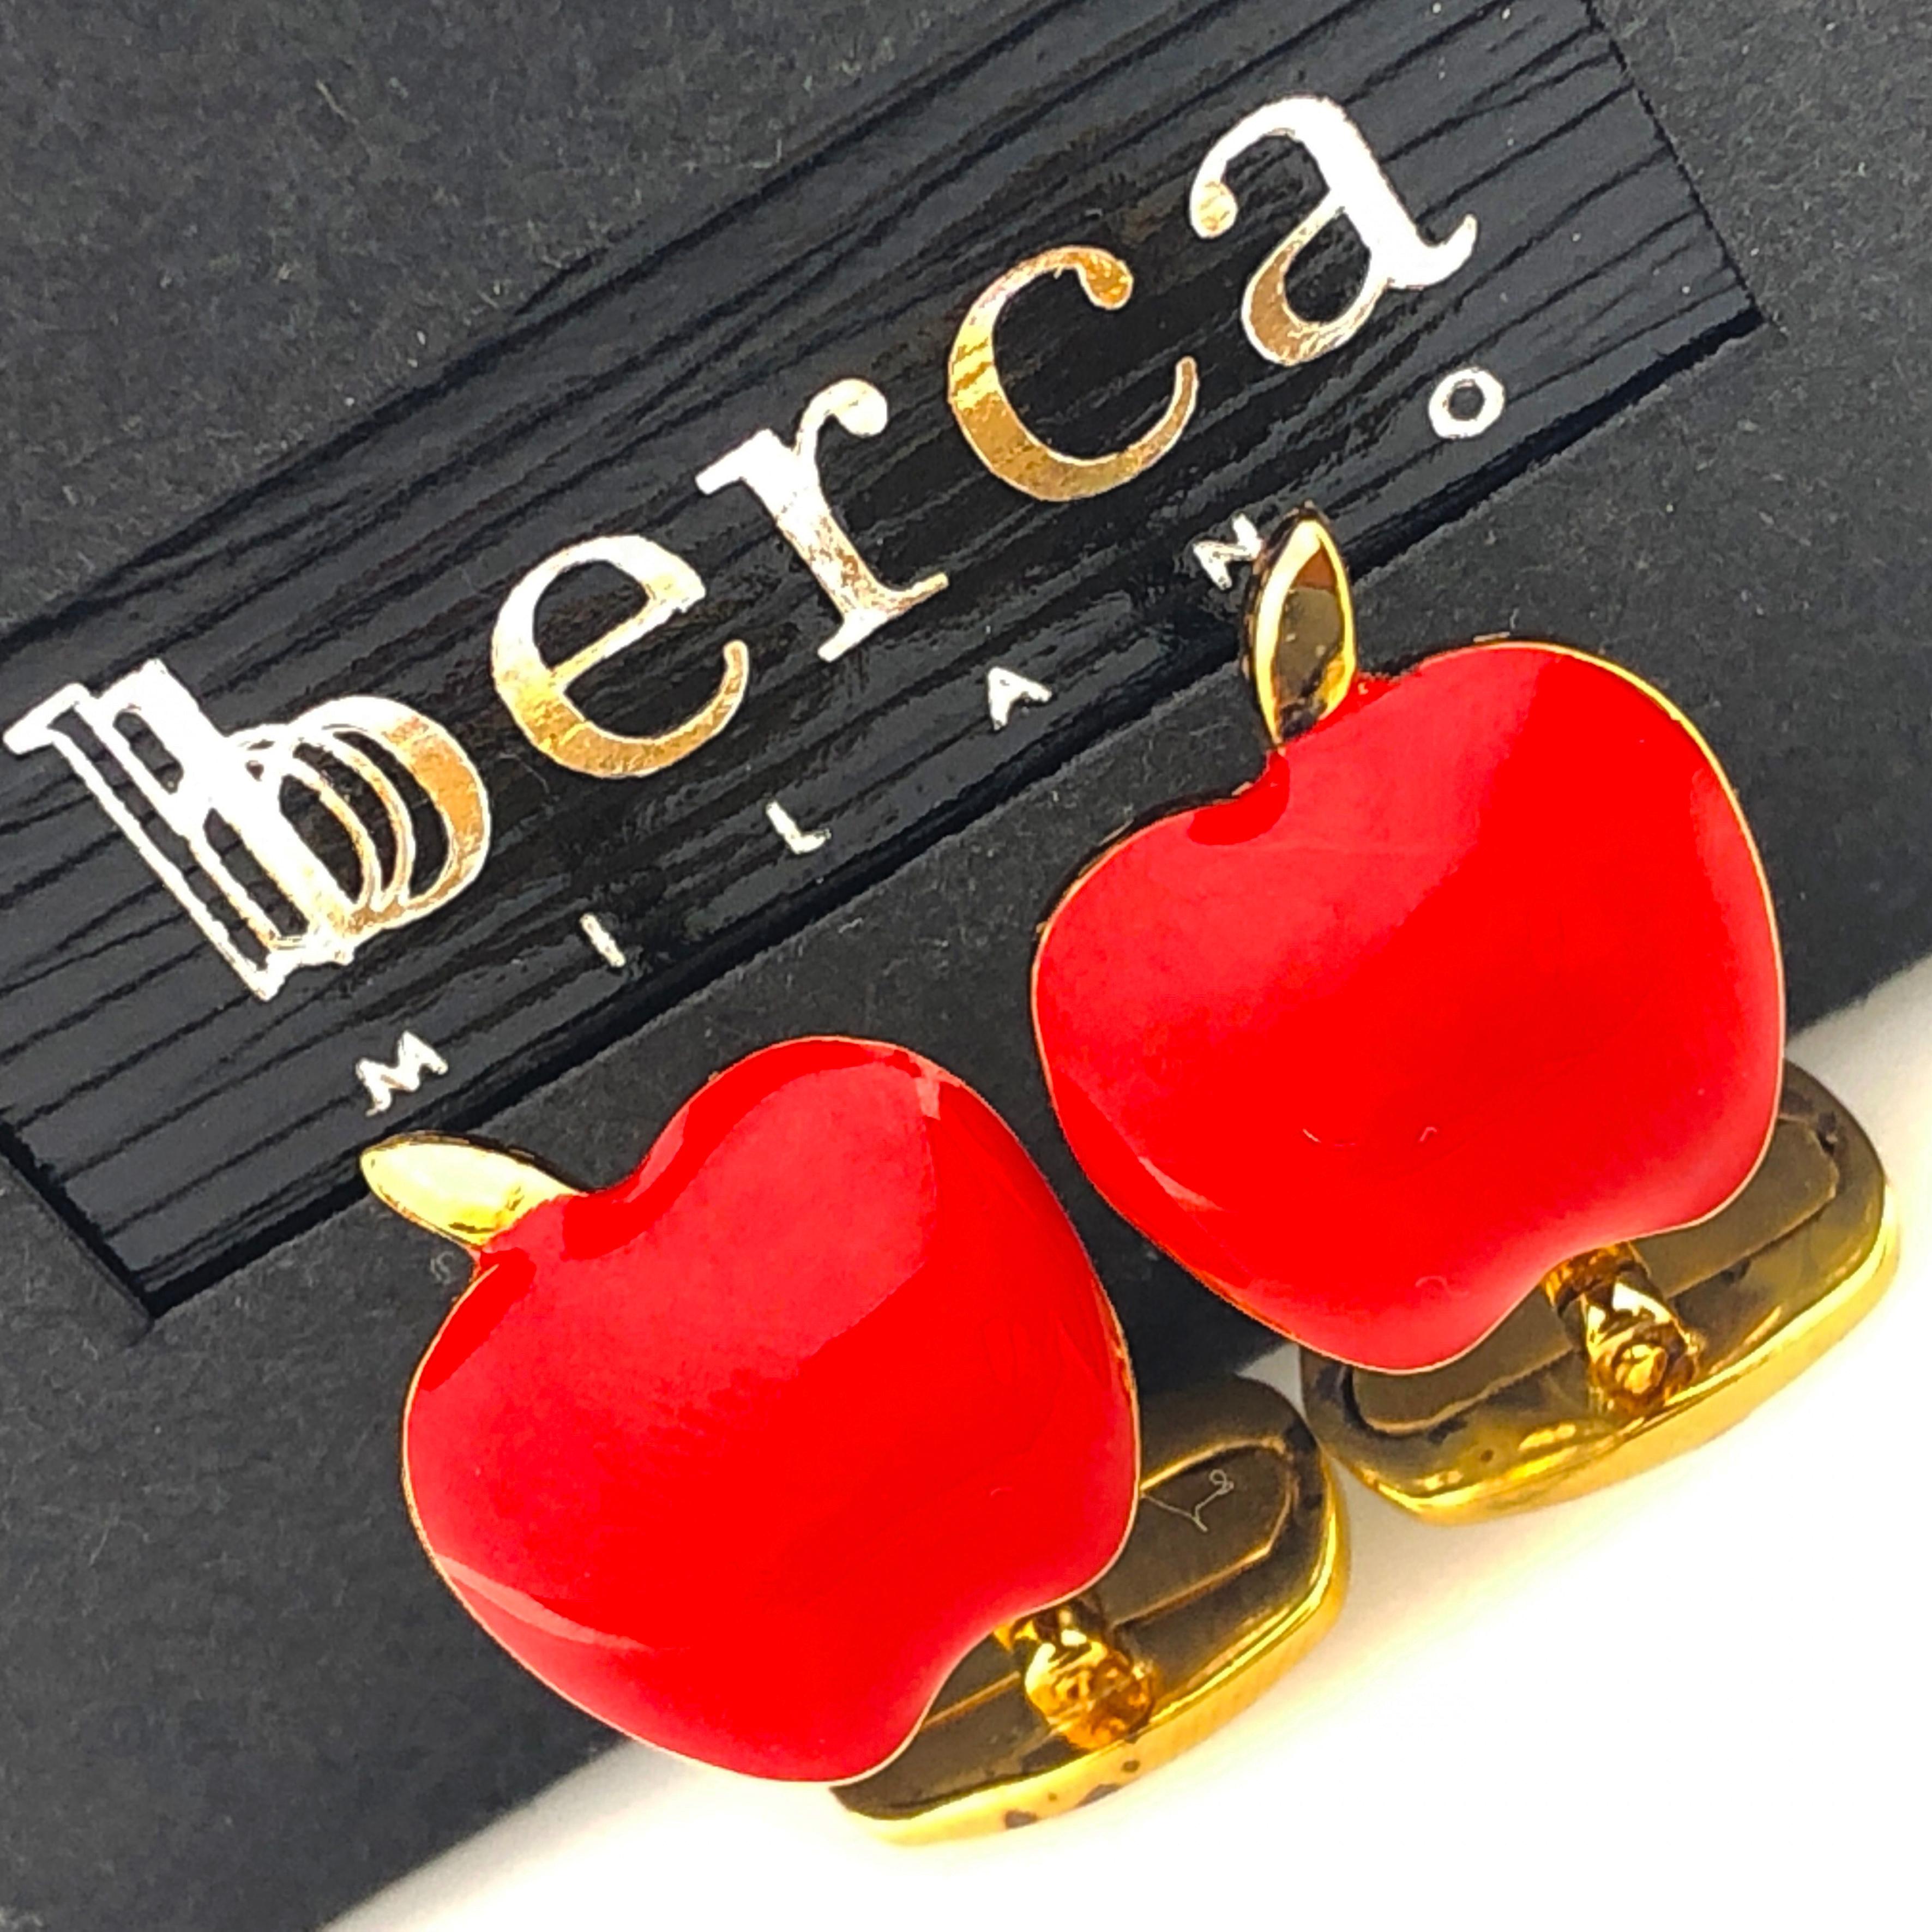 Unique and Chic Red Hand Enamelled Apple Shaped T-Bar Back, Sterling Silver Gold-Plated Cufflinks.
In our smart fitted black box and pouch.